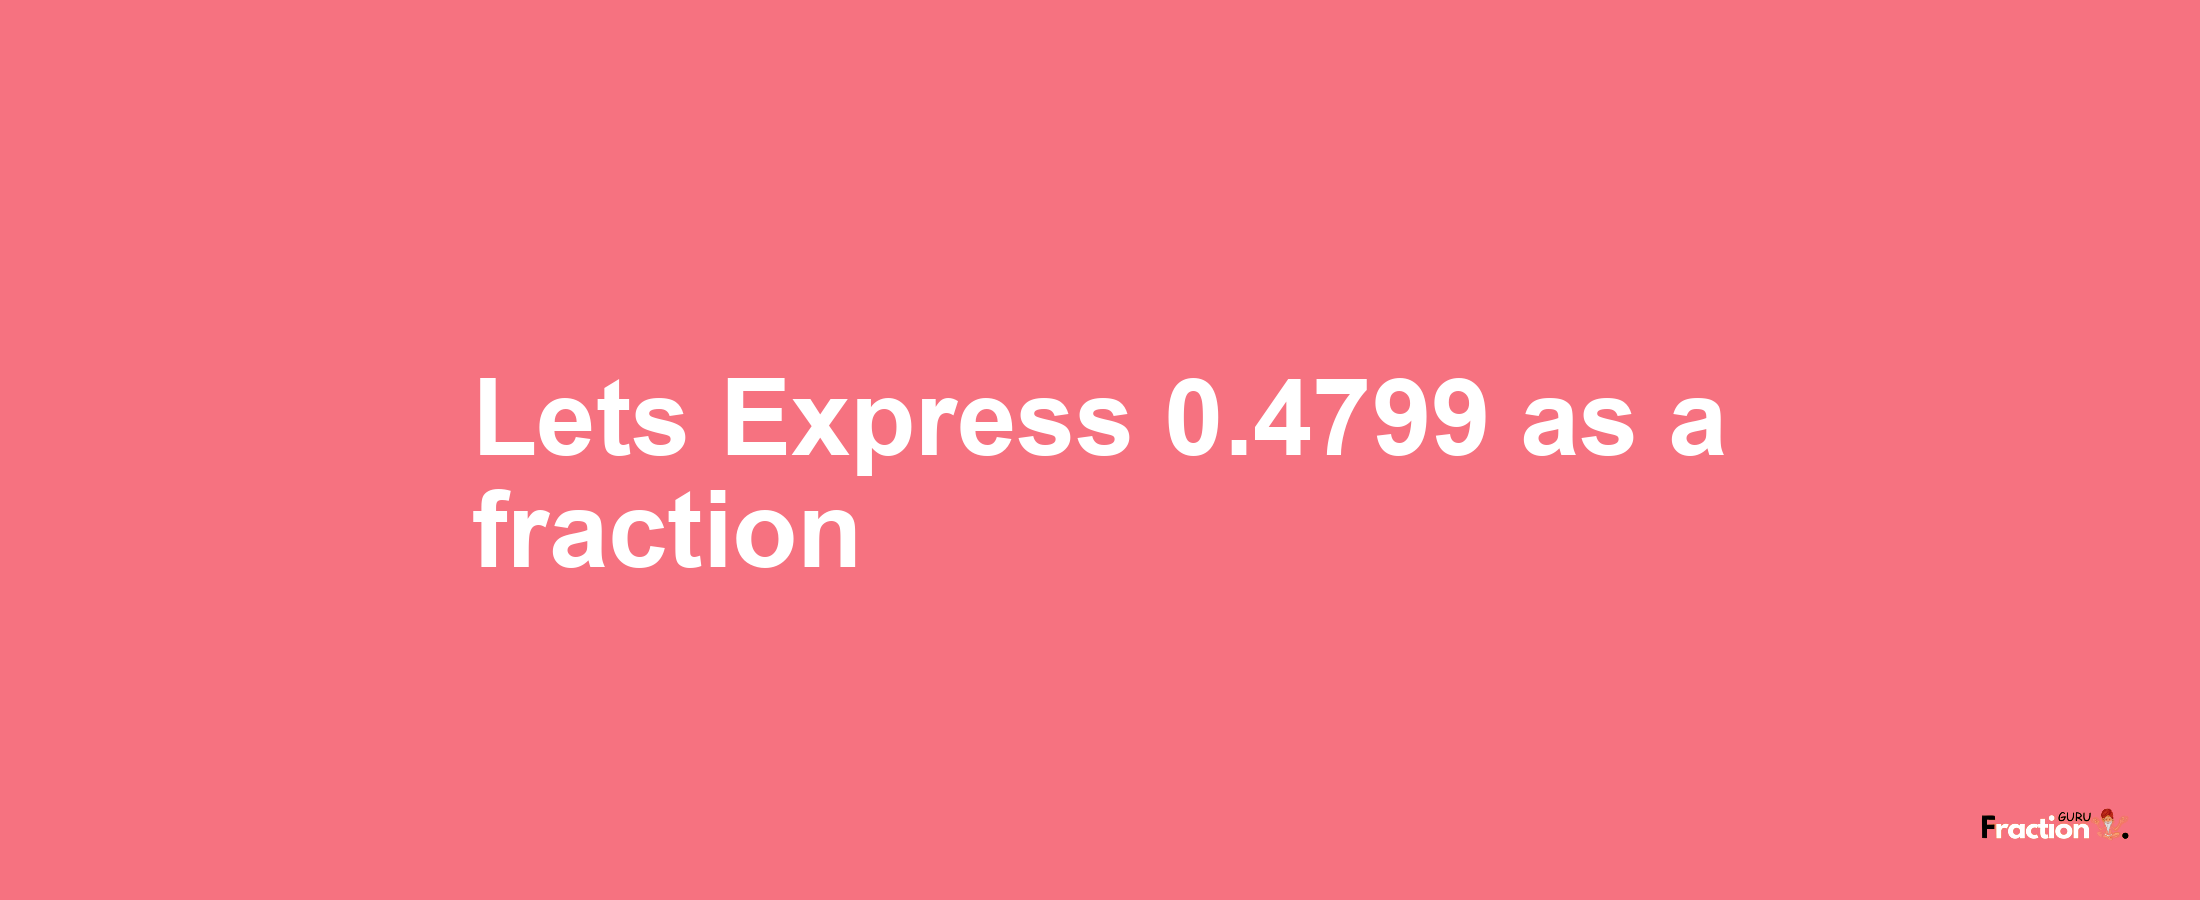 Lets Express 0.4799 as afraction